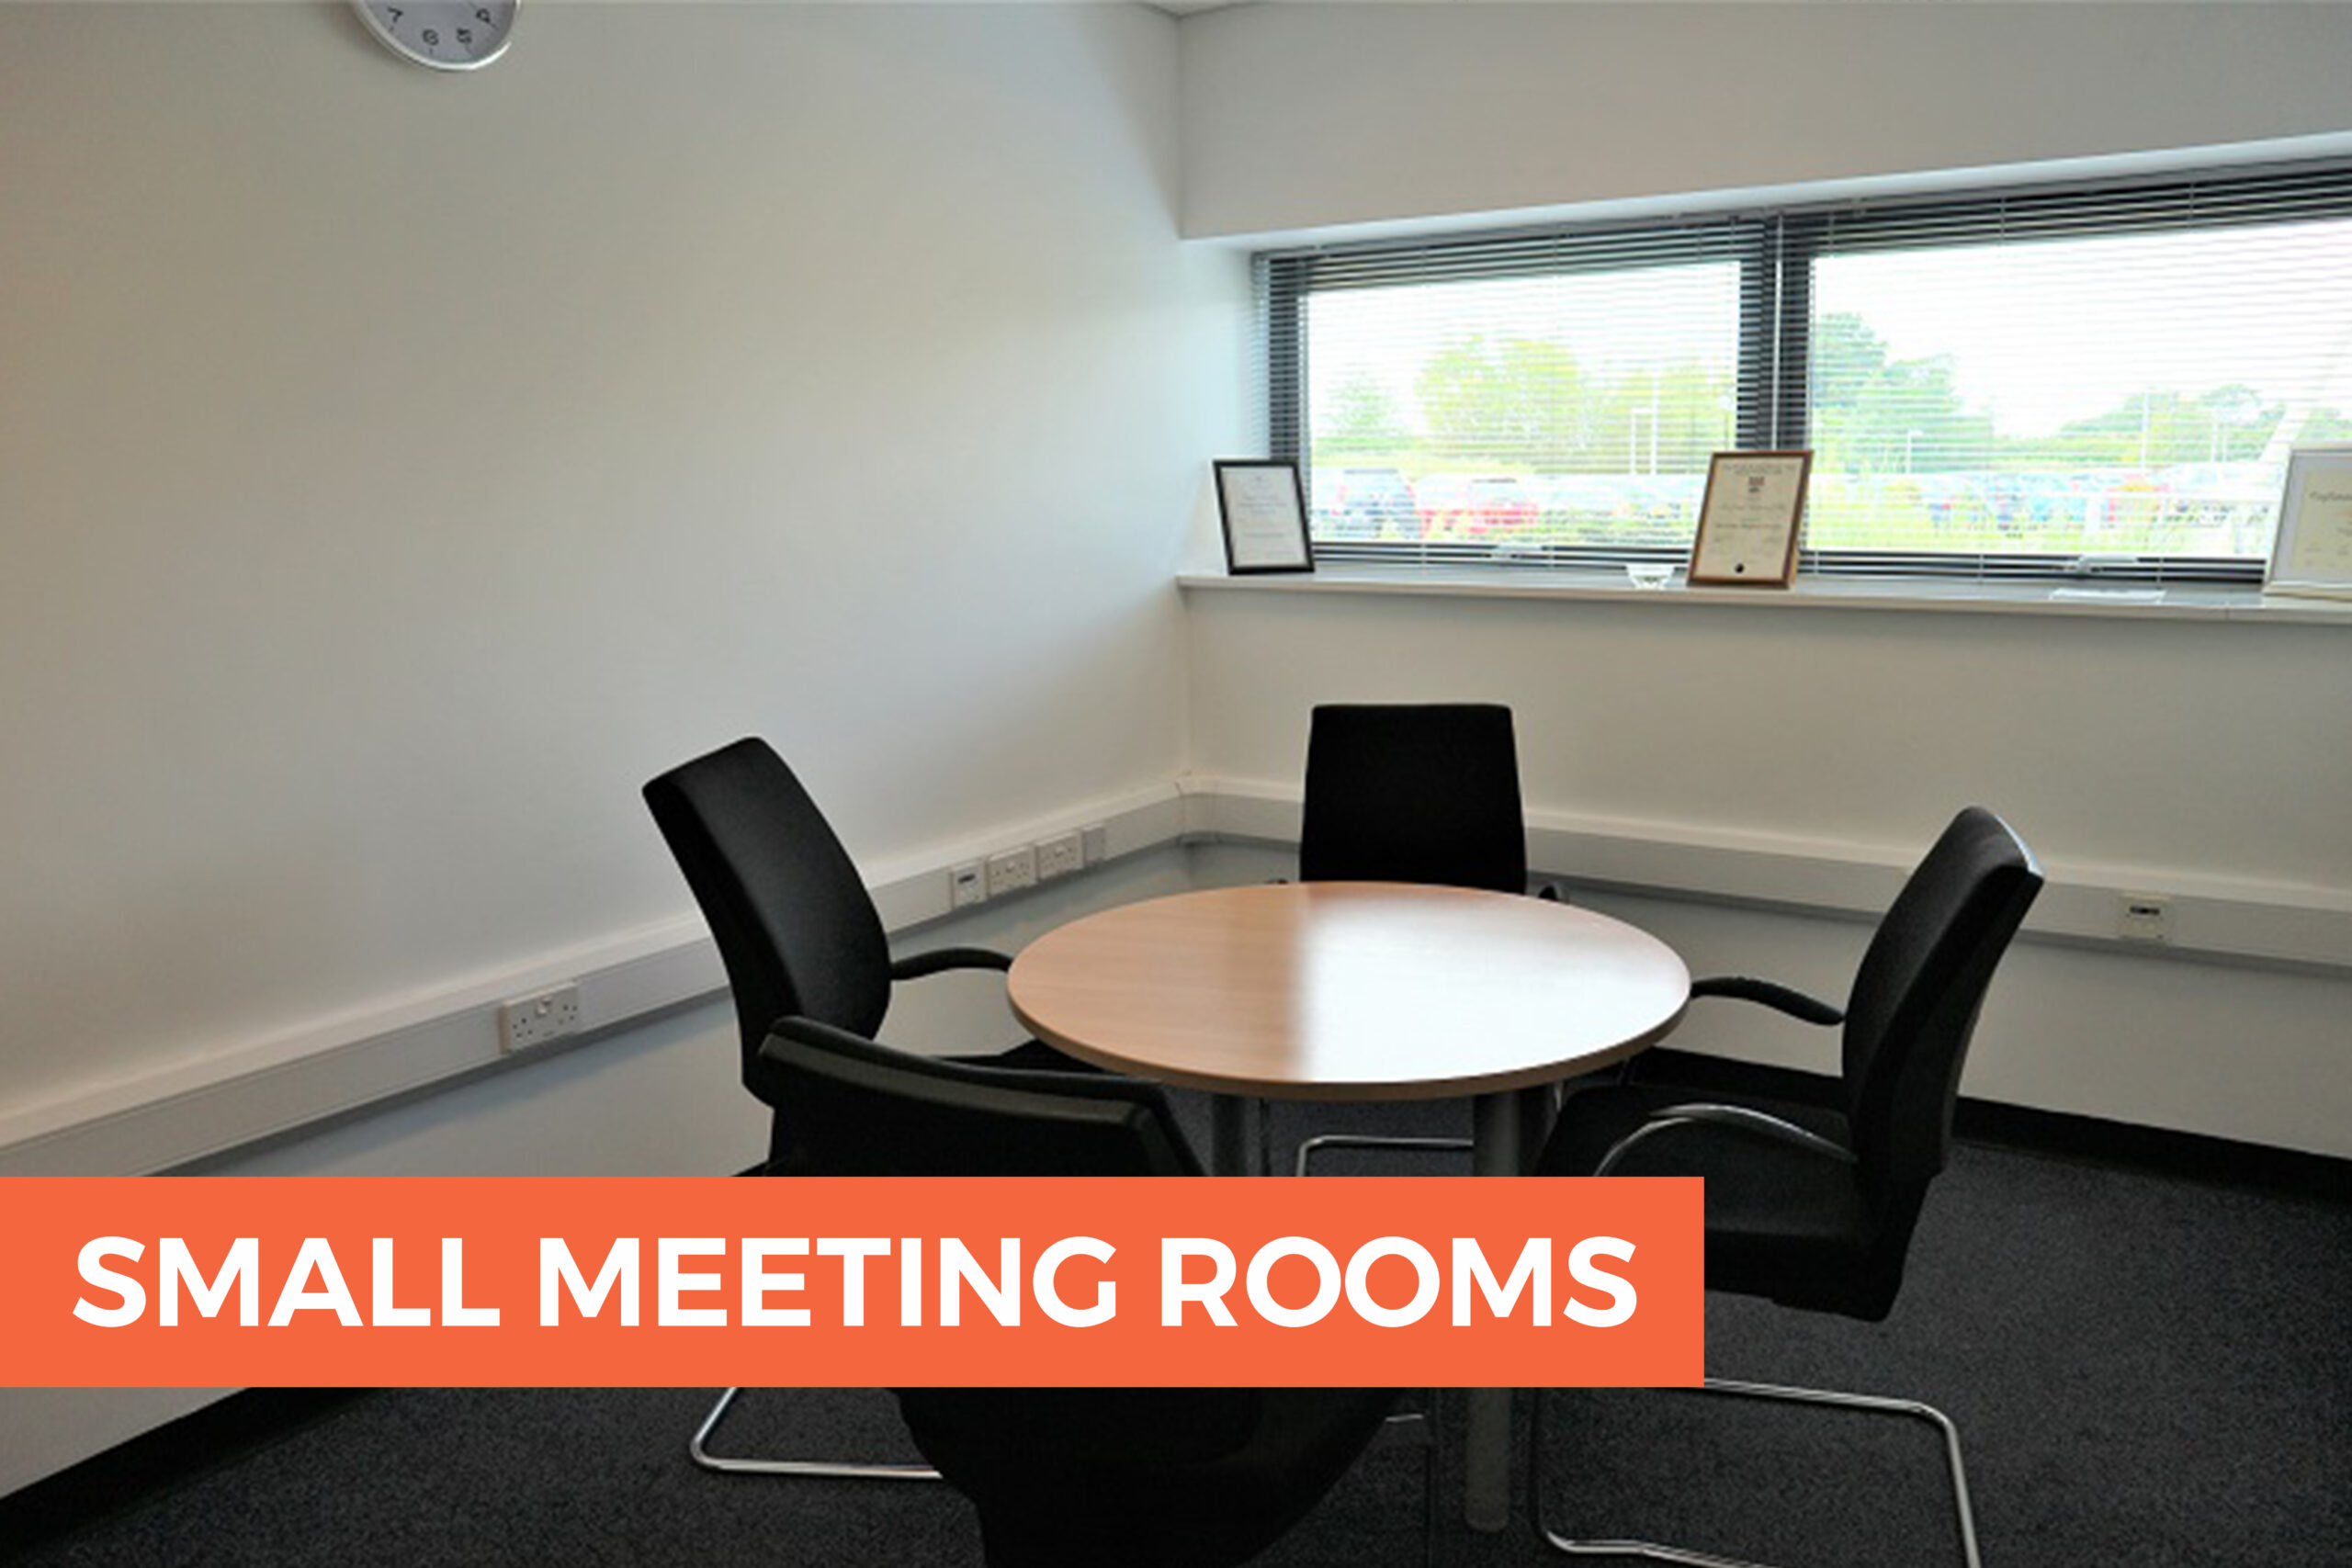 Small meeting rooms with lab space to rent in Norfolk at Hethel Engineering Centre